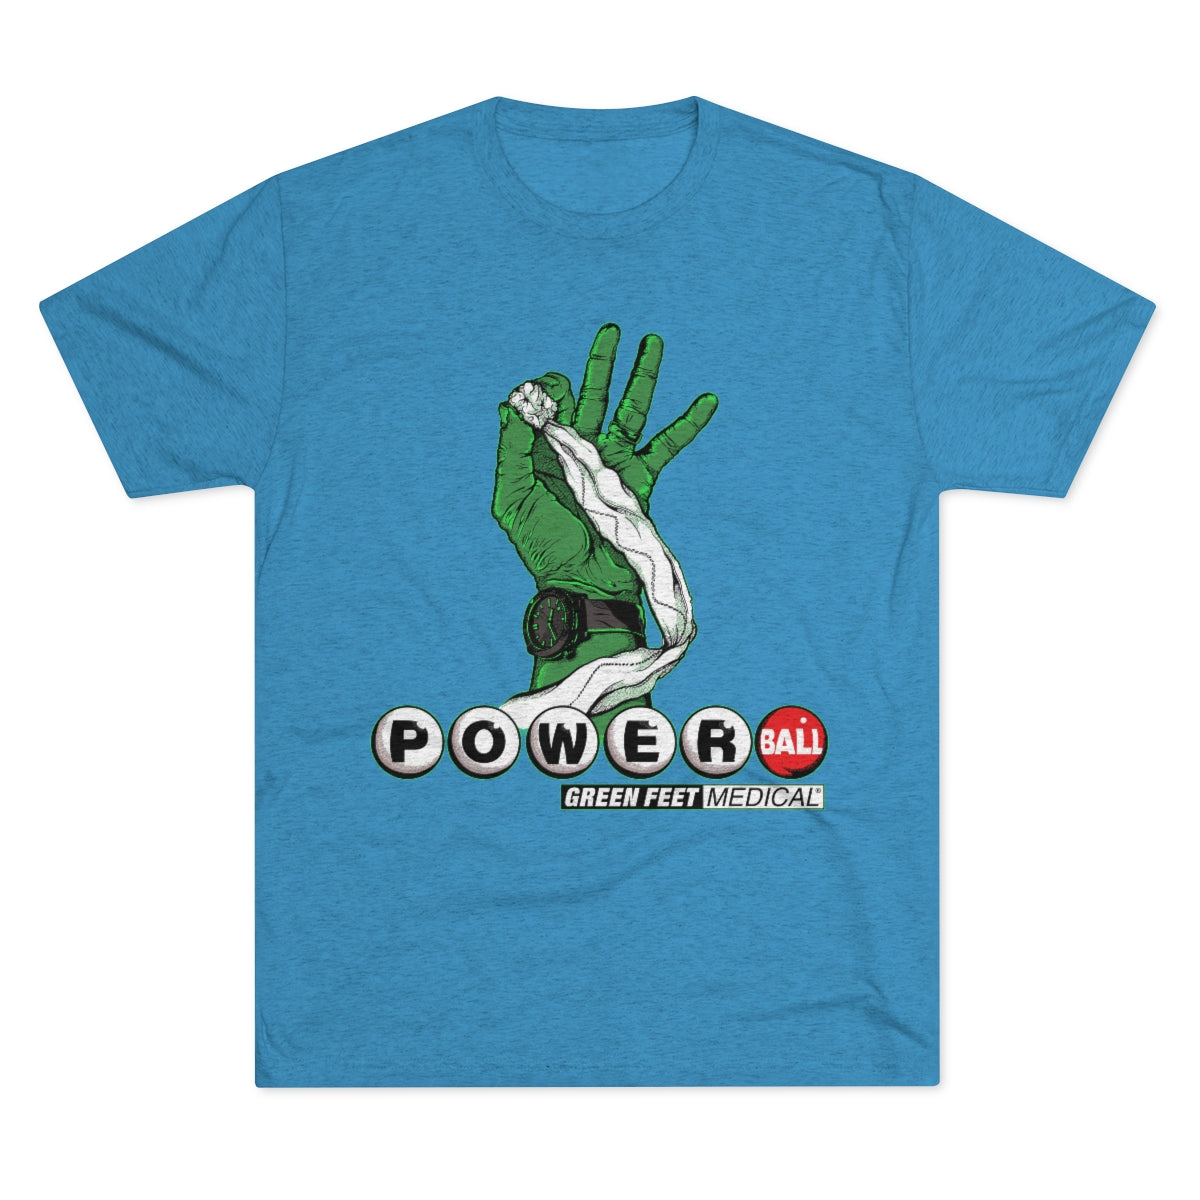 Powerball (No PPE) - Unisex Triblend